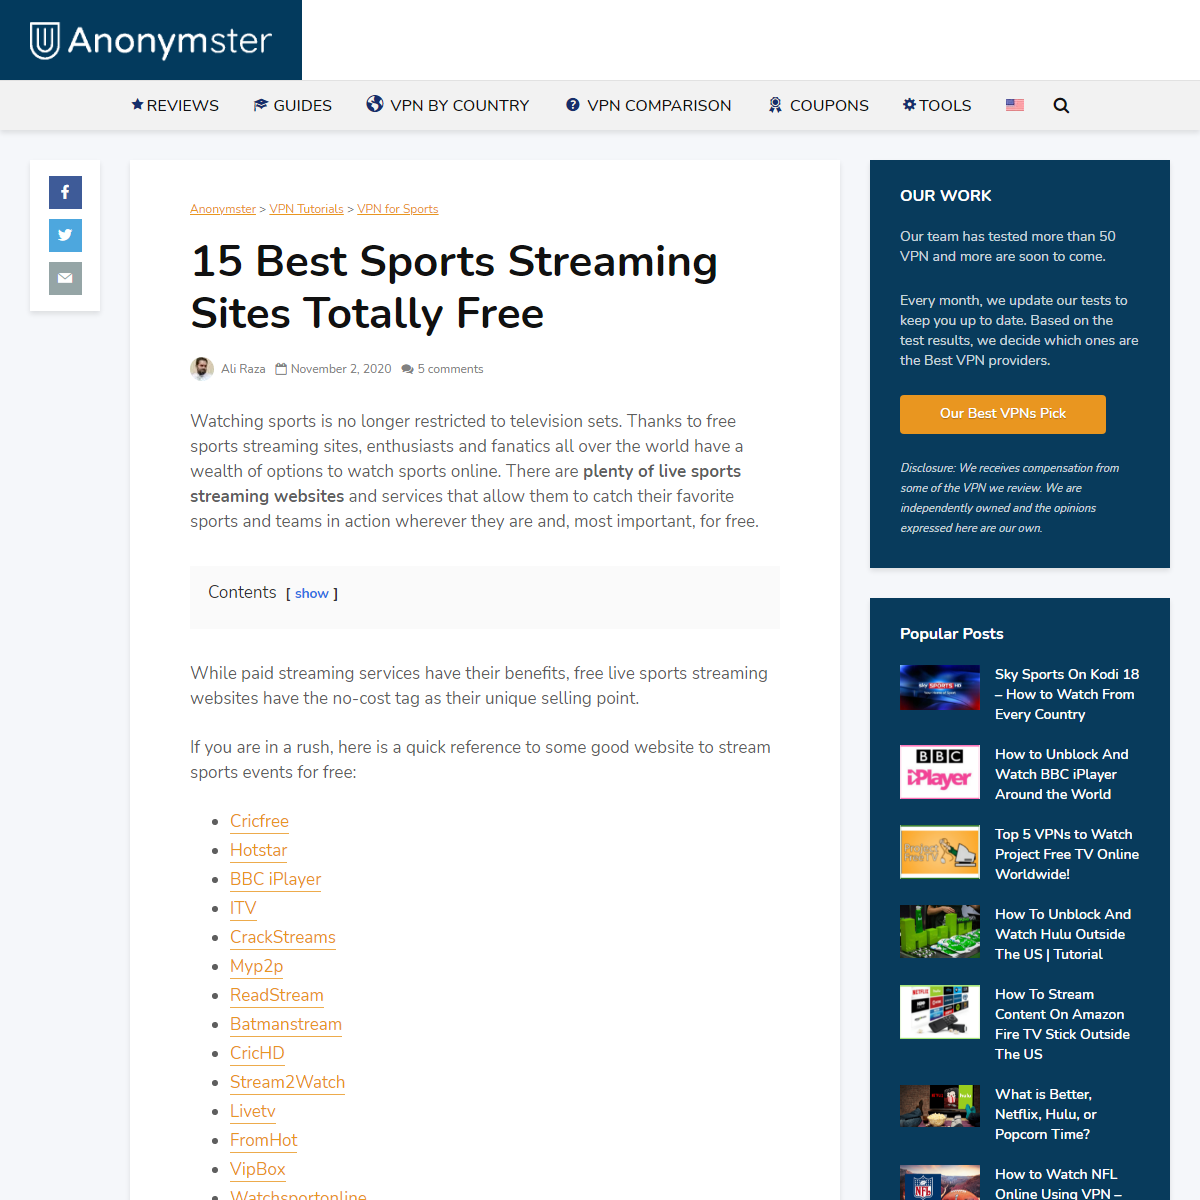 A complete backup of https://anonymster.com/free-sports-streaming-websites/